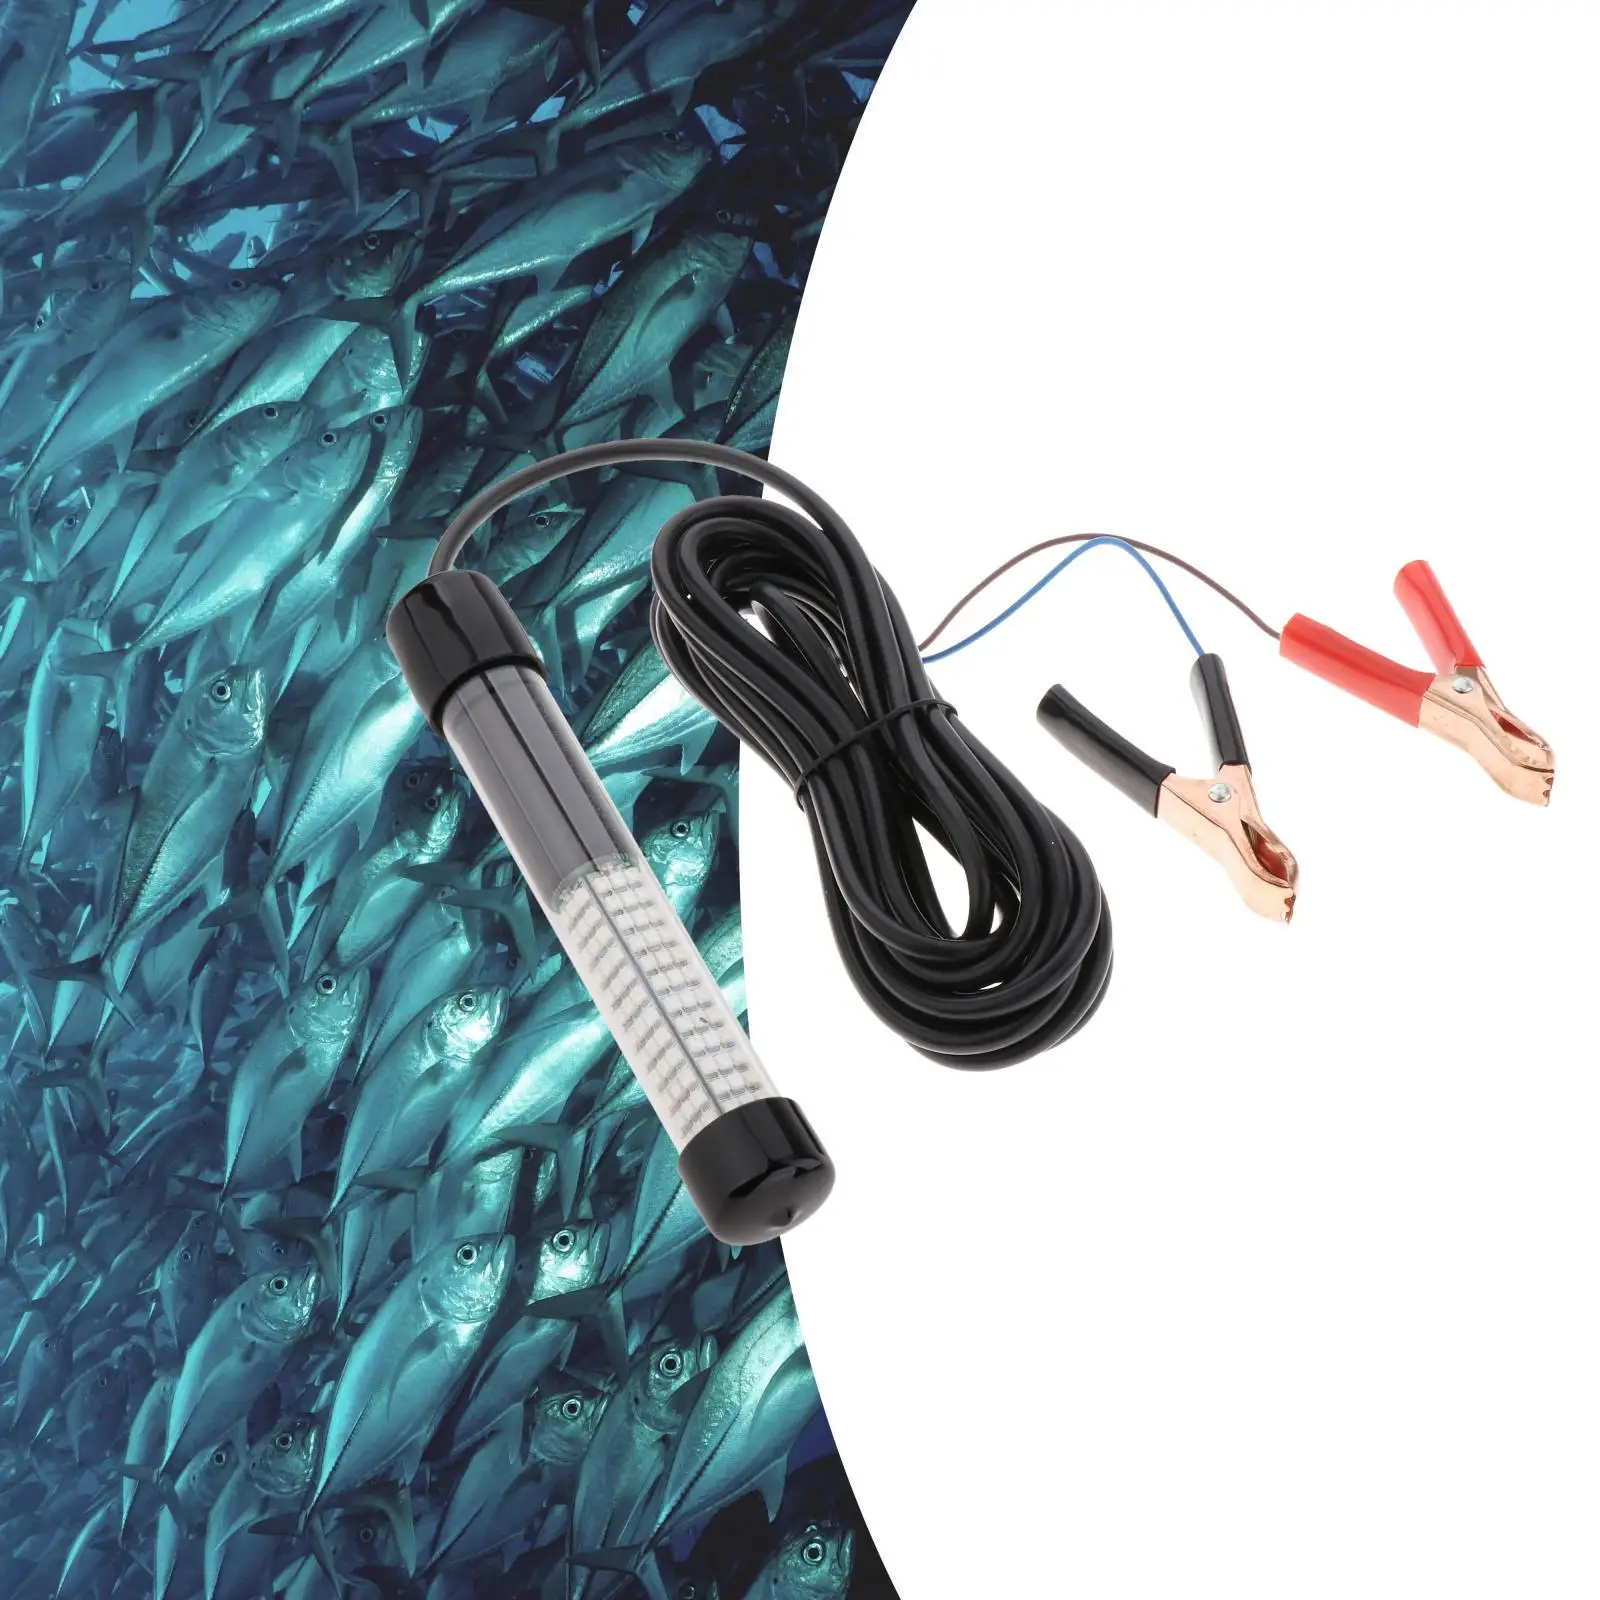 180 LEDs Submersible Fishing Light 5M Cord 20W Waterproof Fishes Finder Lamp Underwater Fishing Light for Boat Saltwater Fishing